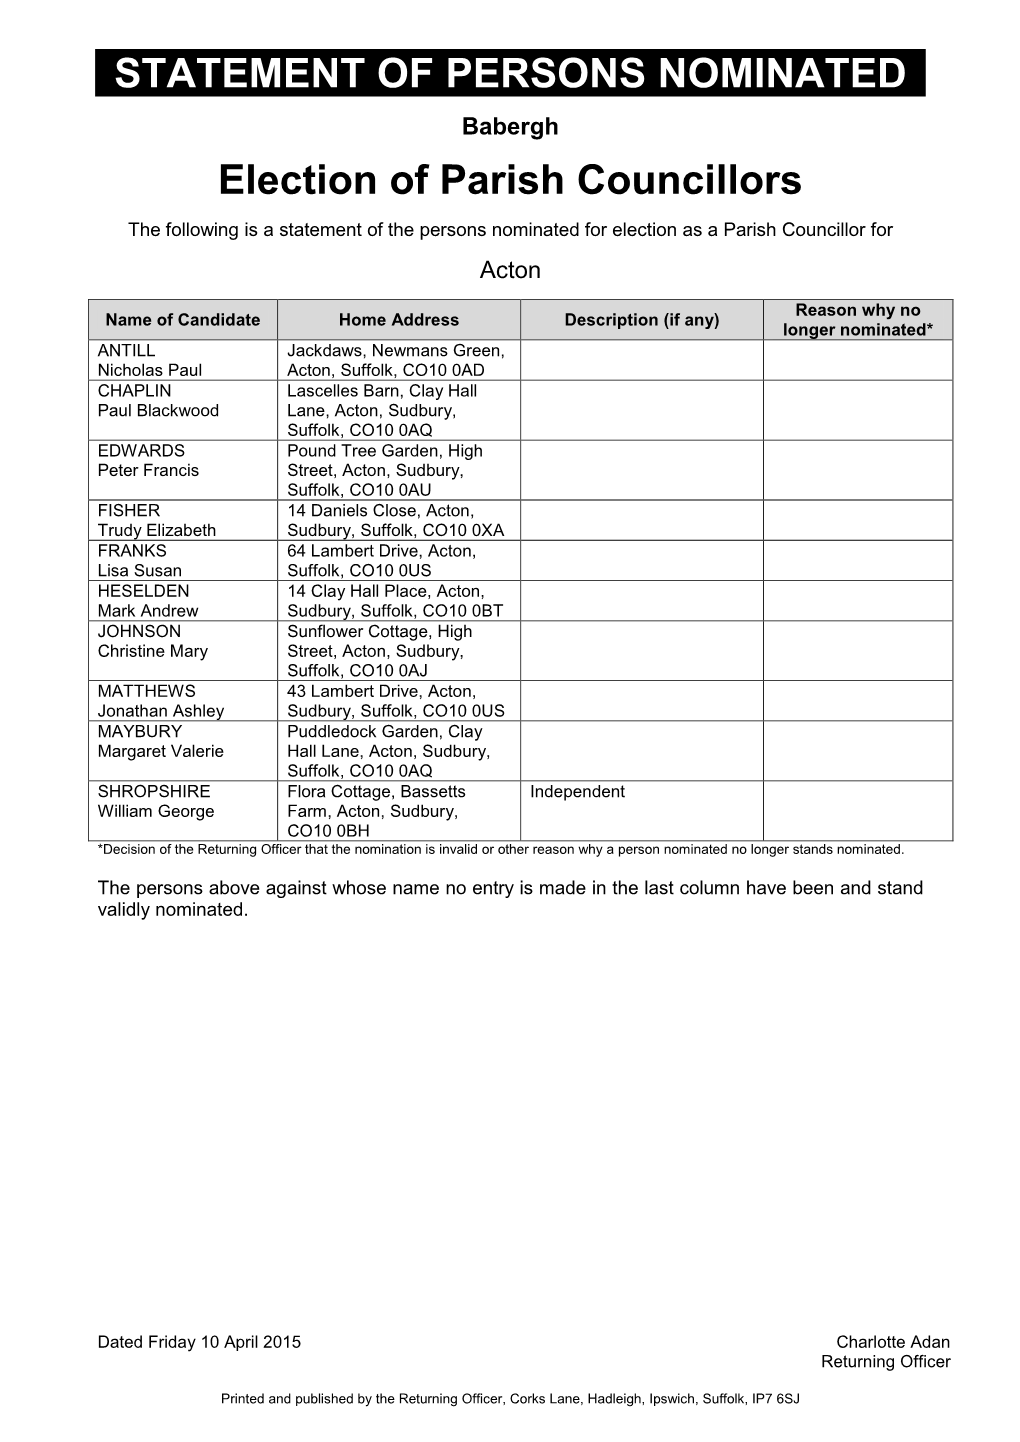 STATEMENT of PERSONS NOMINATED Election of Parish